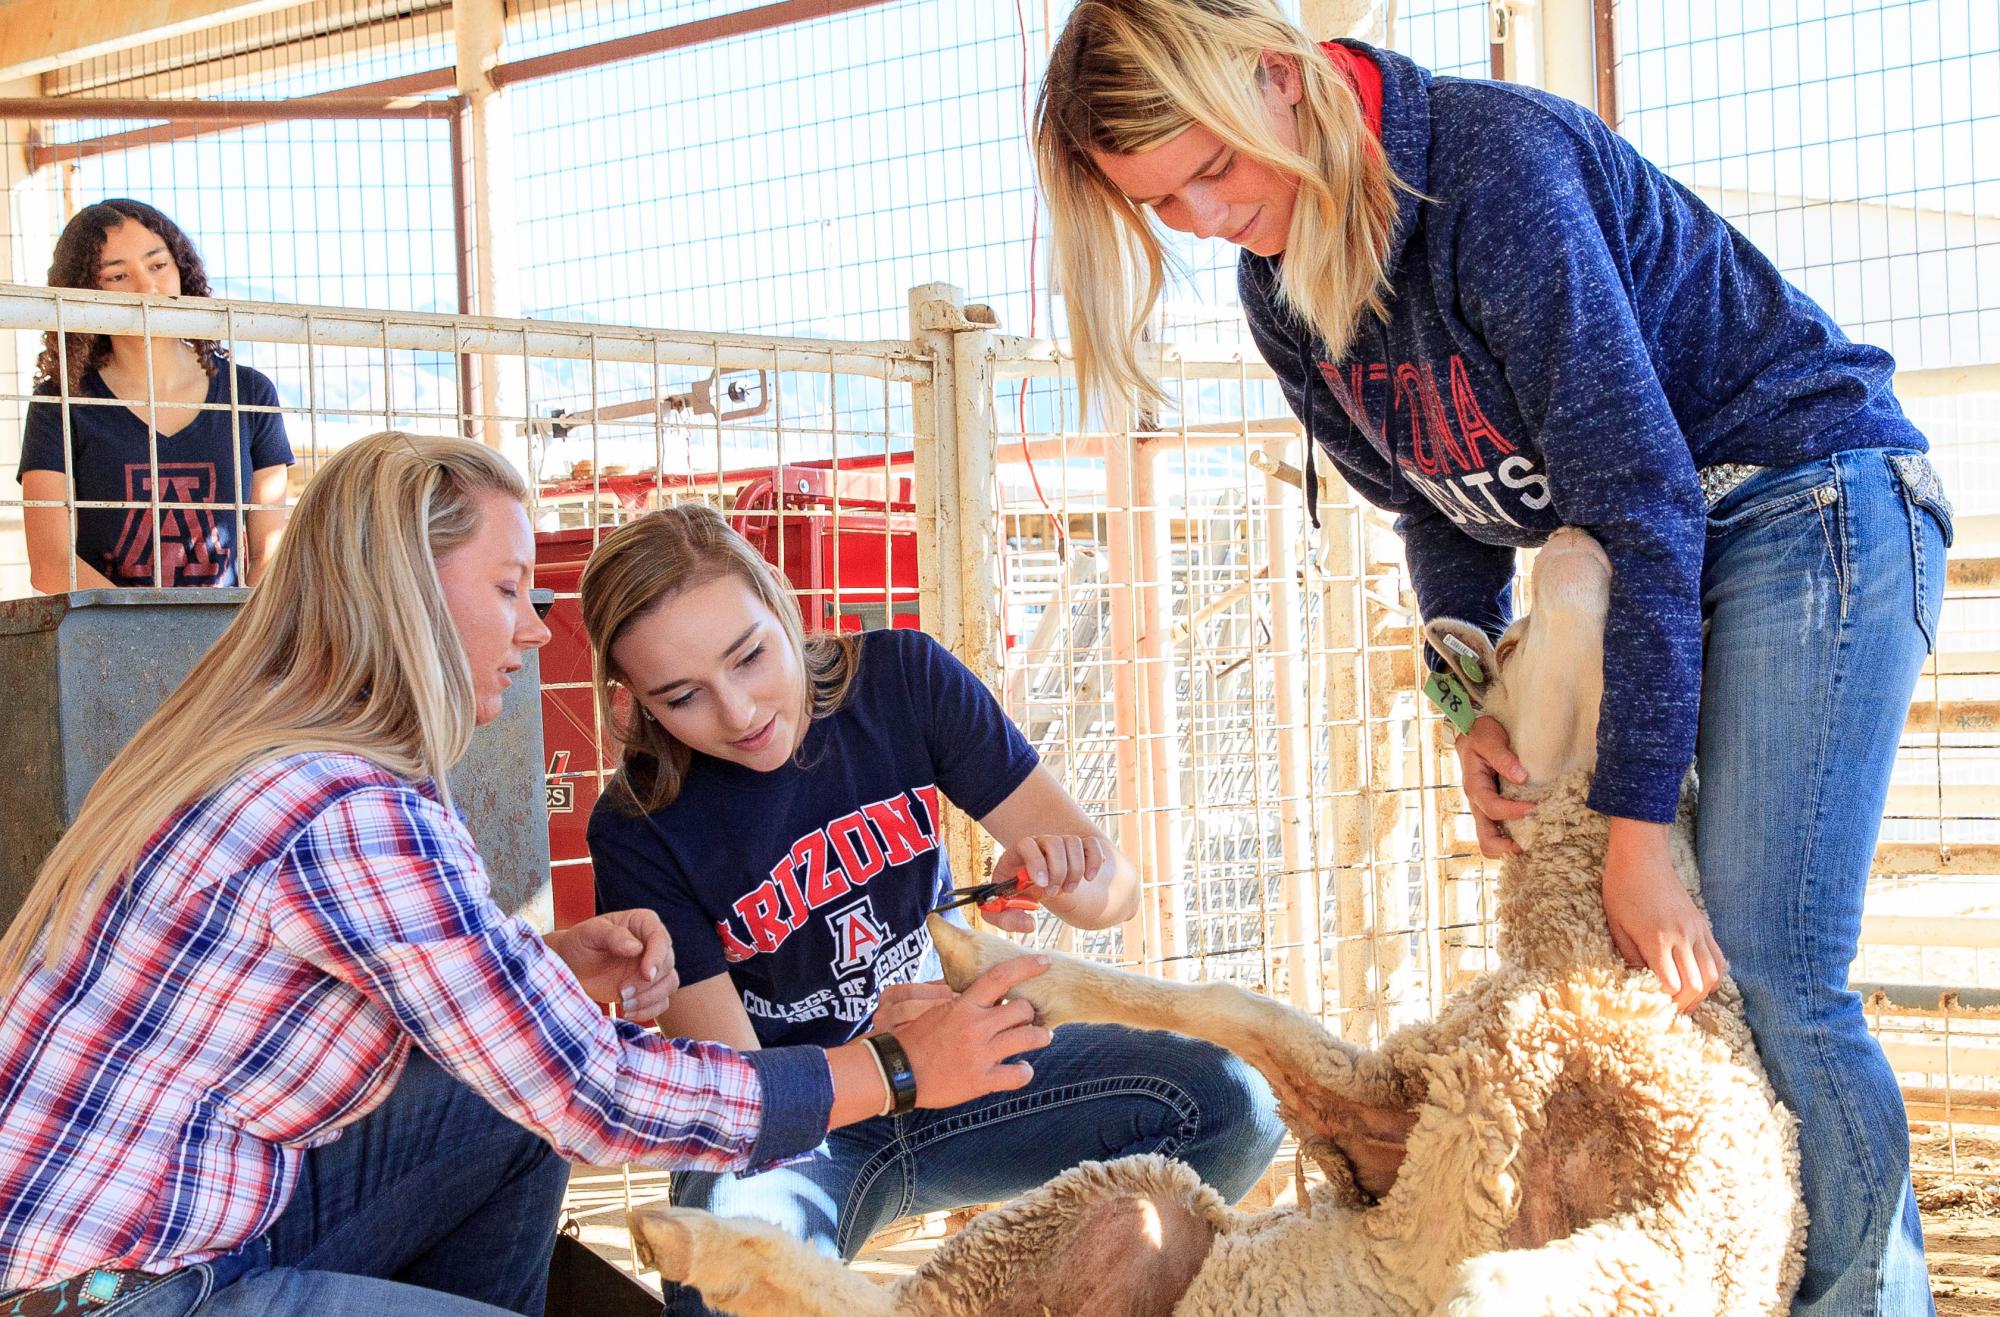 Students trimming hooves of sheep